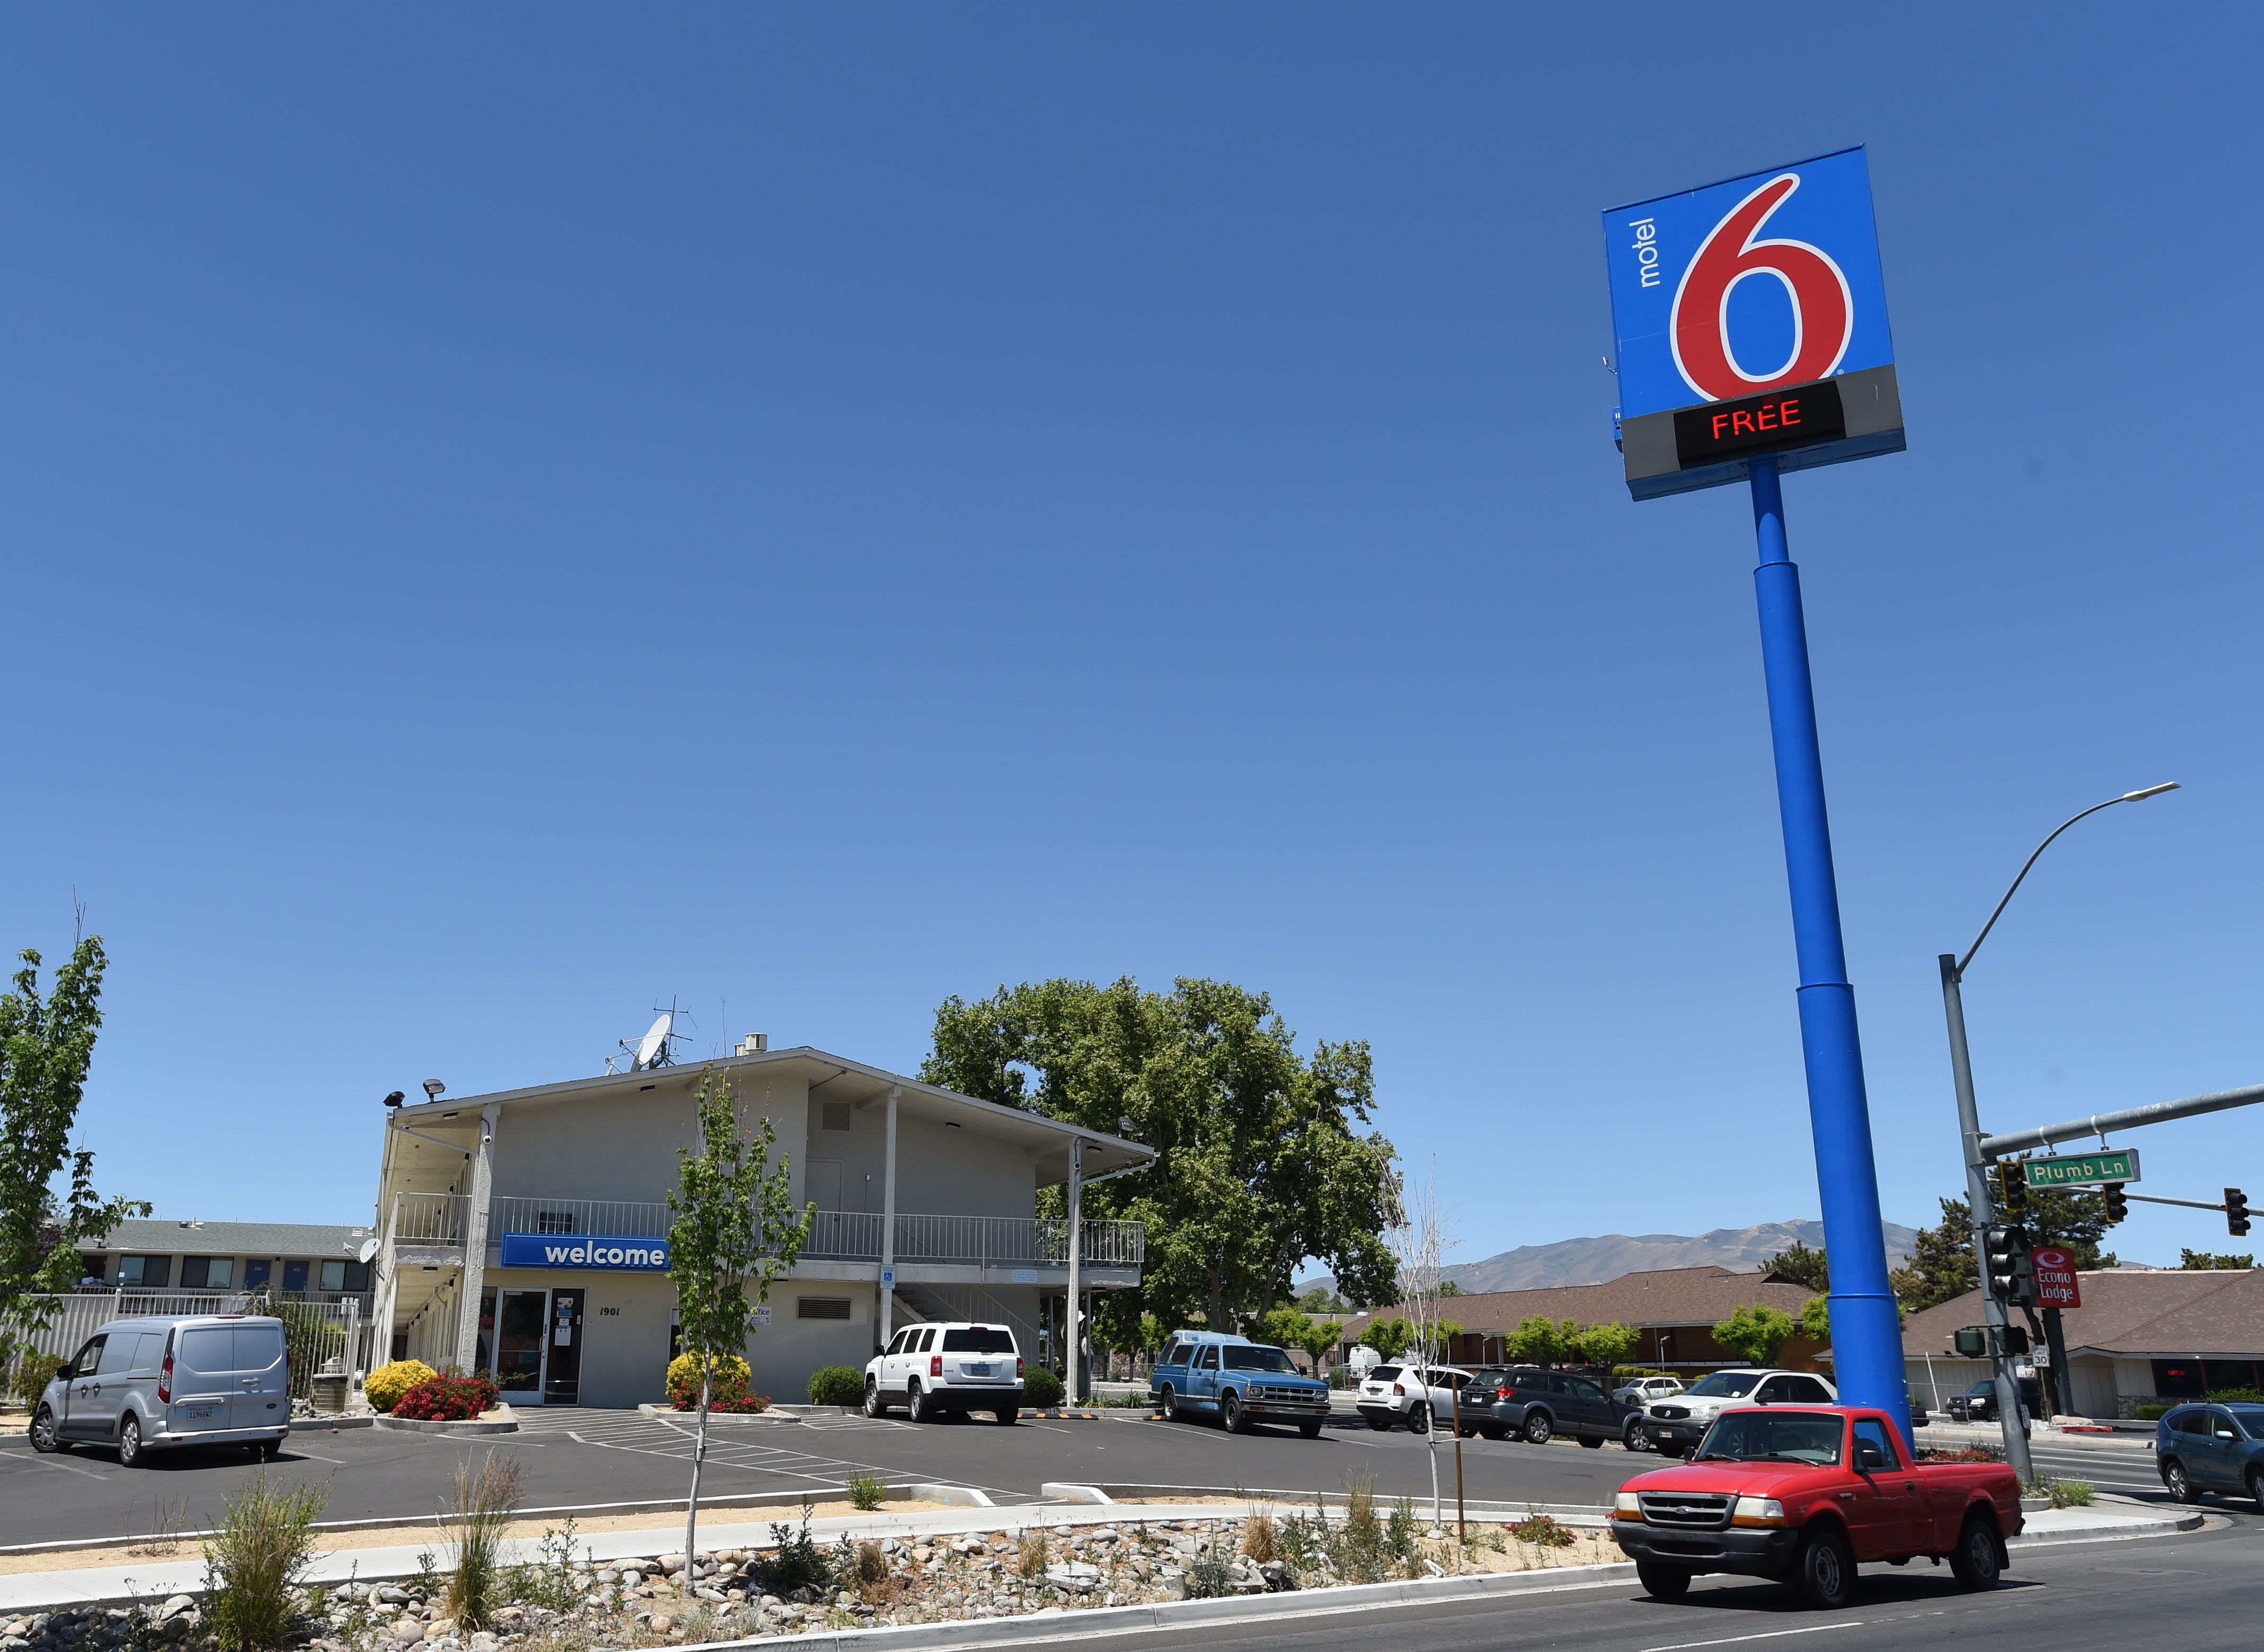 colleen stahl recommends Motel 6 Reno Nevada